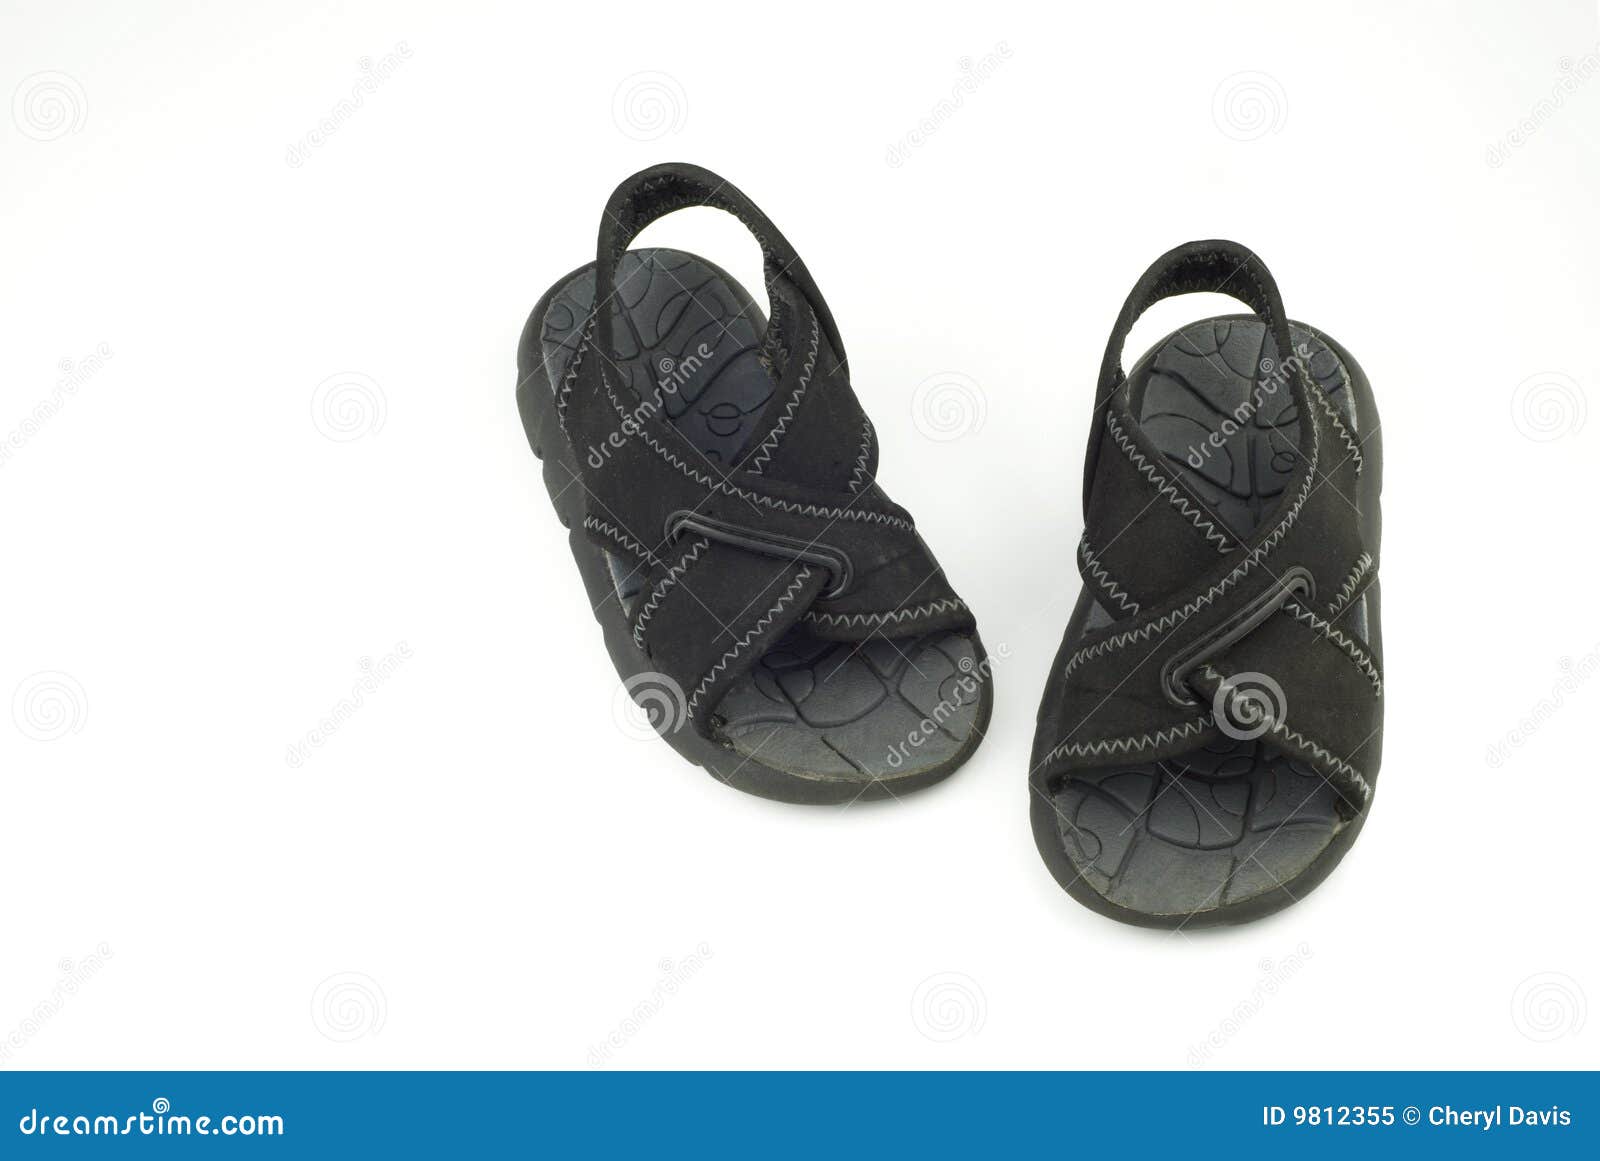 Infant Black Sandals For Boy Royalty Free Stock Photo - Image: 9812355